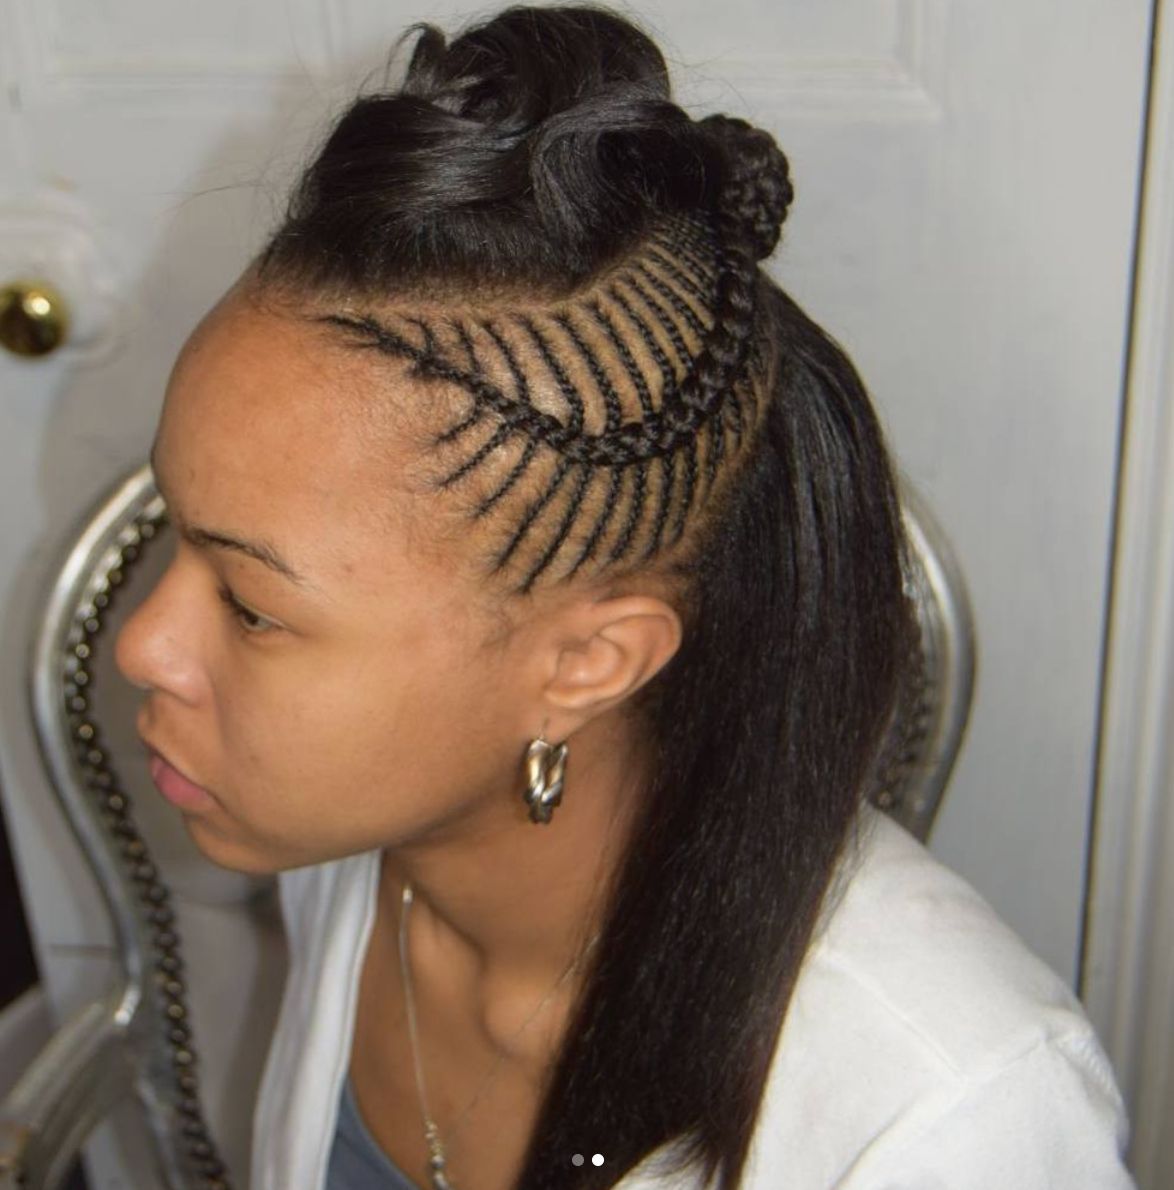 Fashionable Full Scalp Patterned Side Braided Hairstyles Within 30 Beautiful Fishbone Braid Hairstyles For Black Women (View 7 of 20)